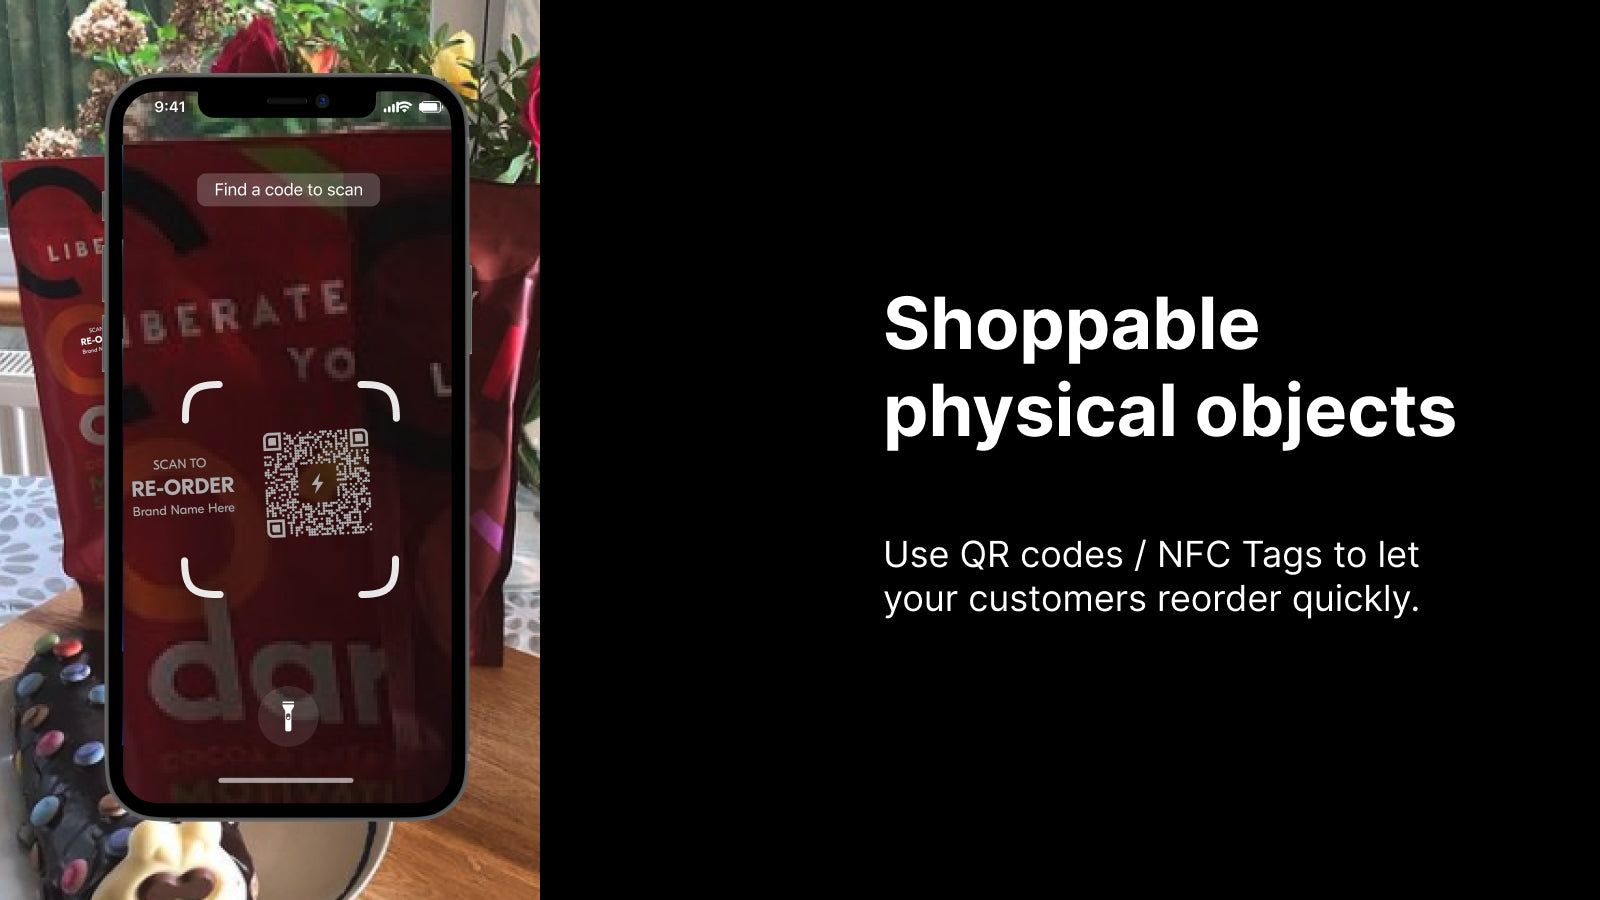 Shoppable physical objects